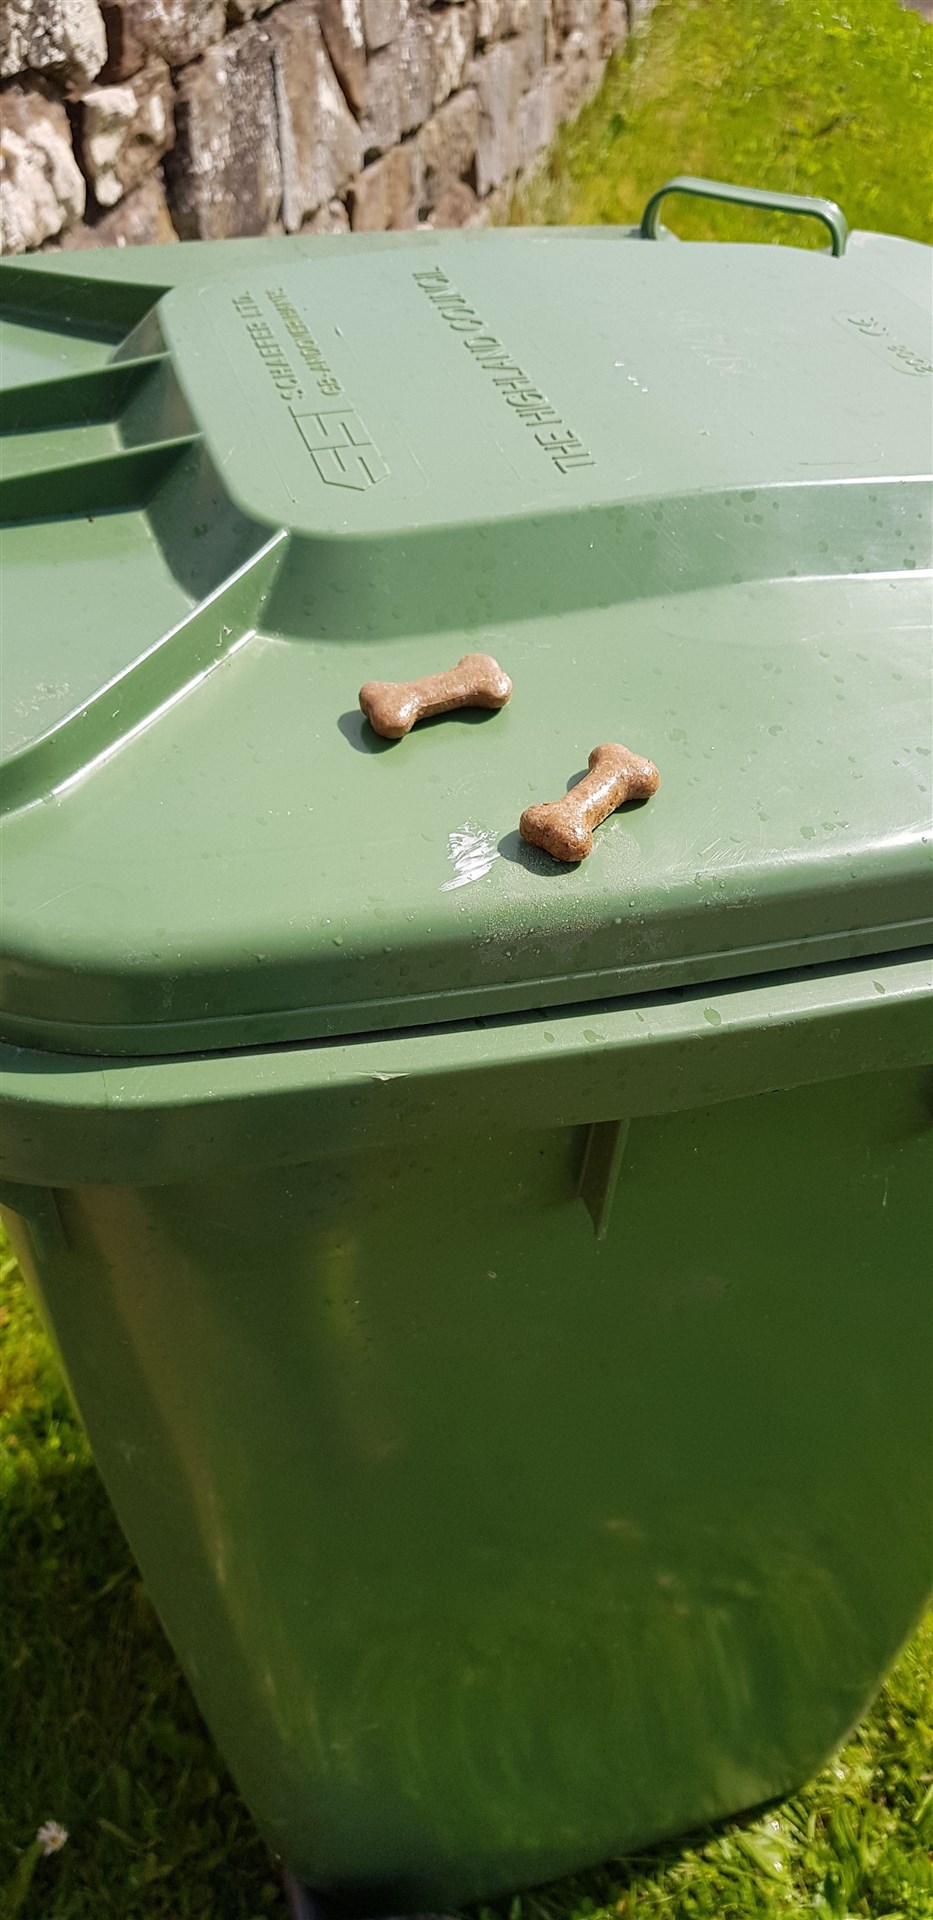 Peggy's owner was touched to see the bin men had left doggy biscuits.